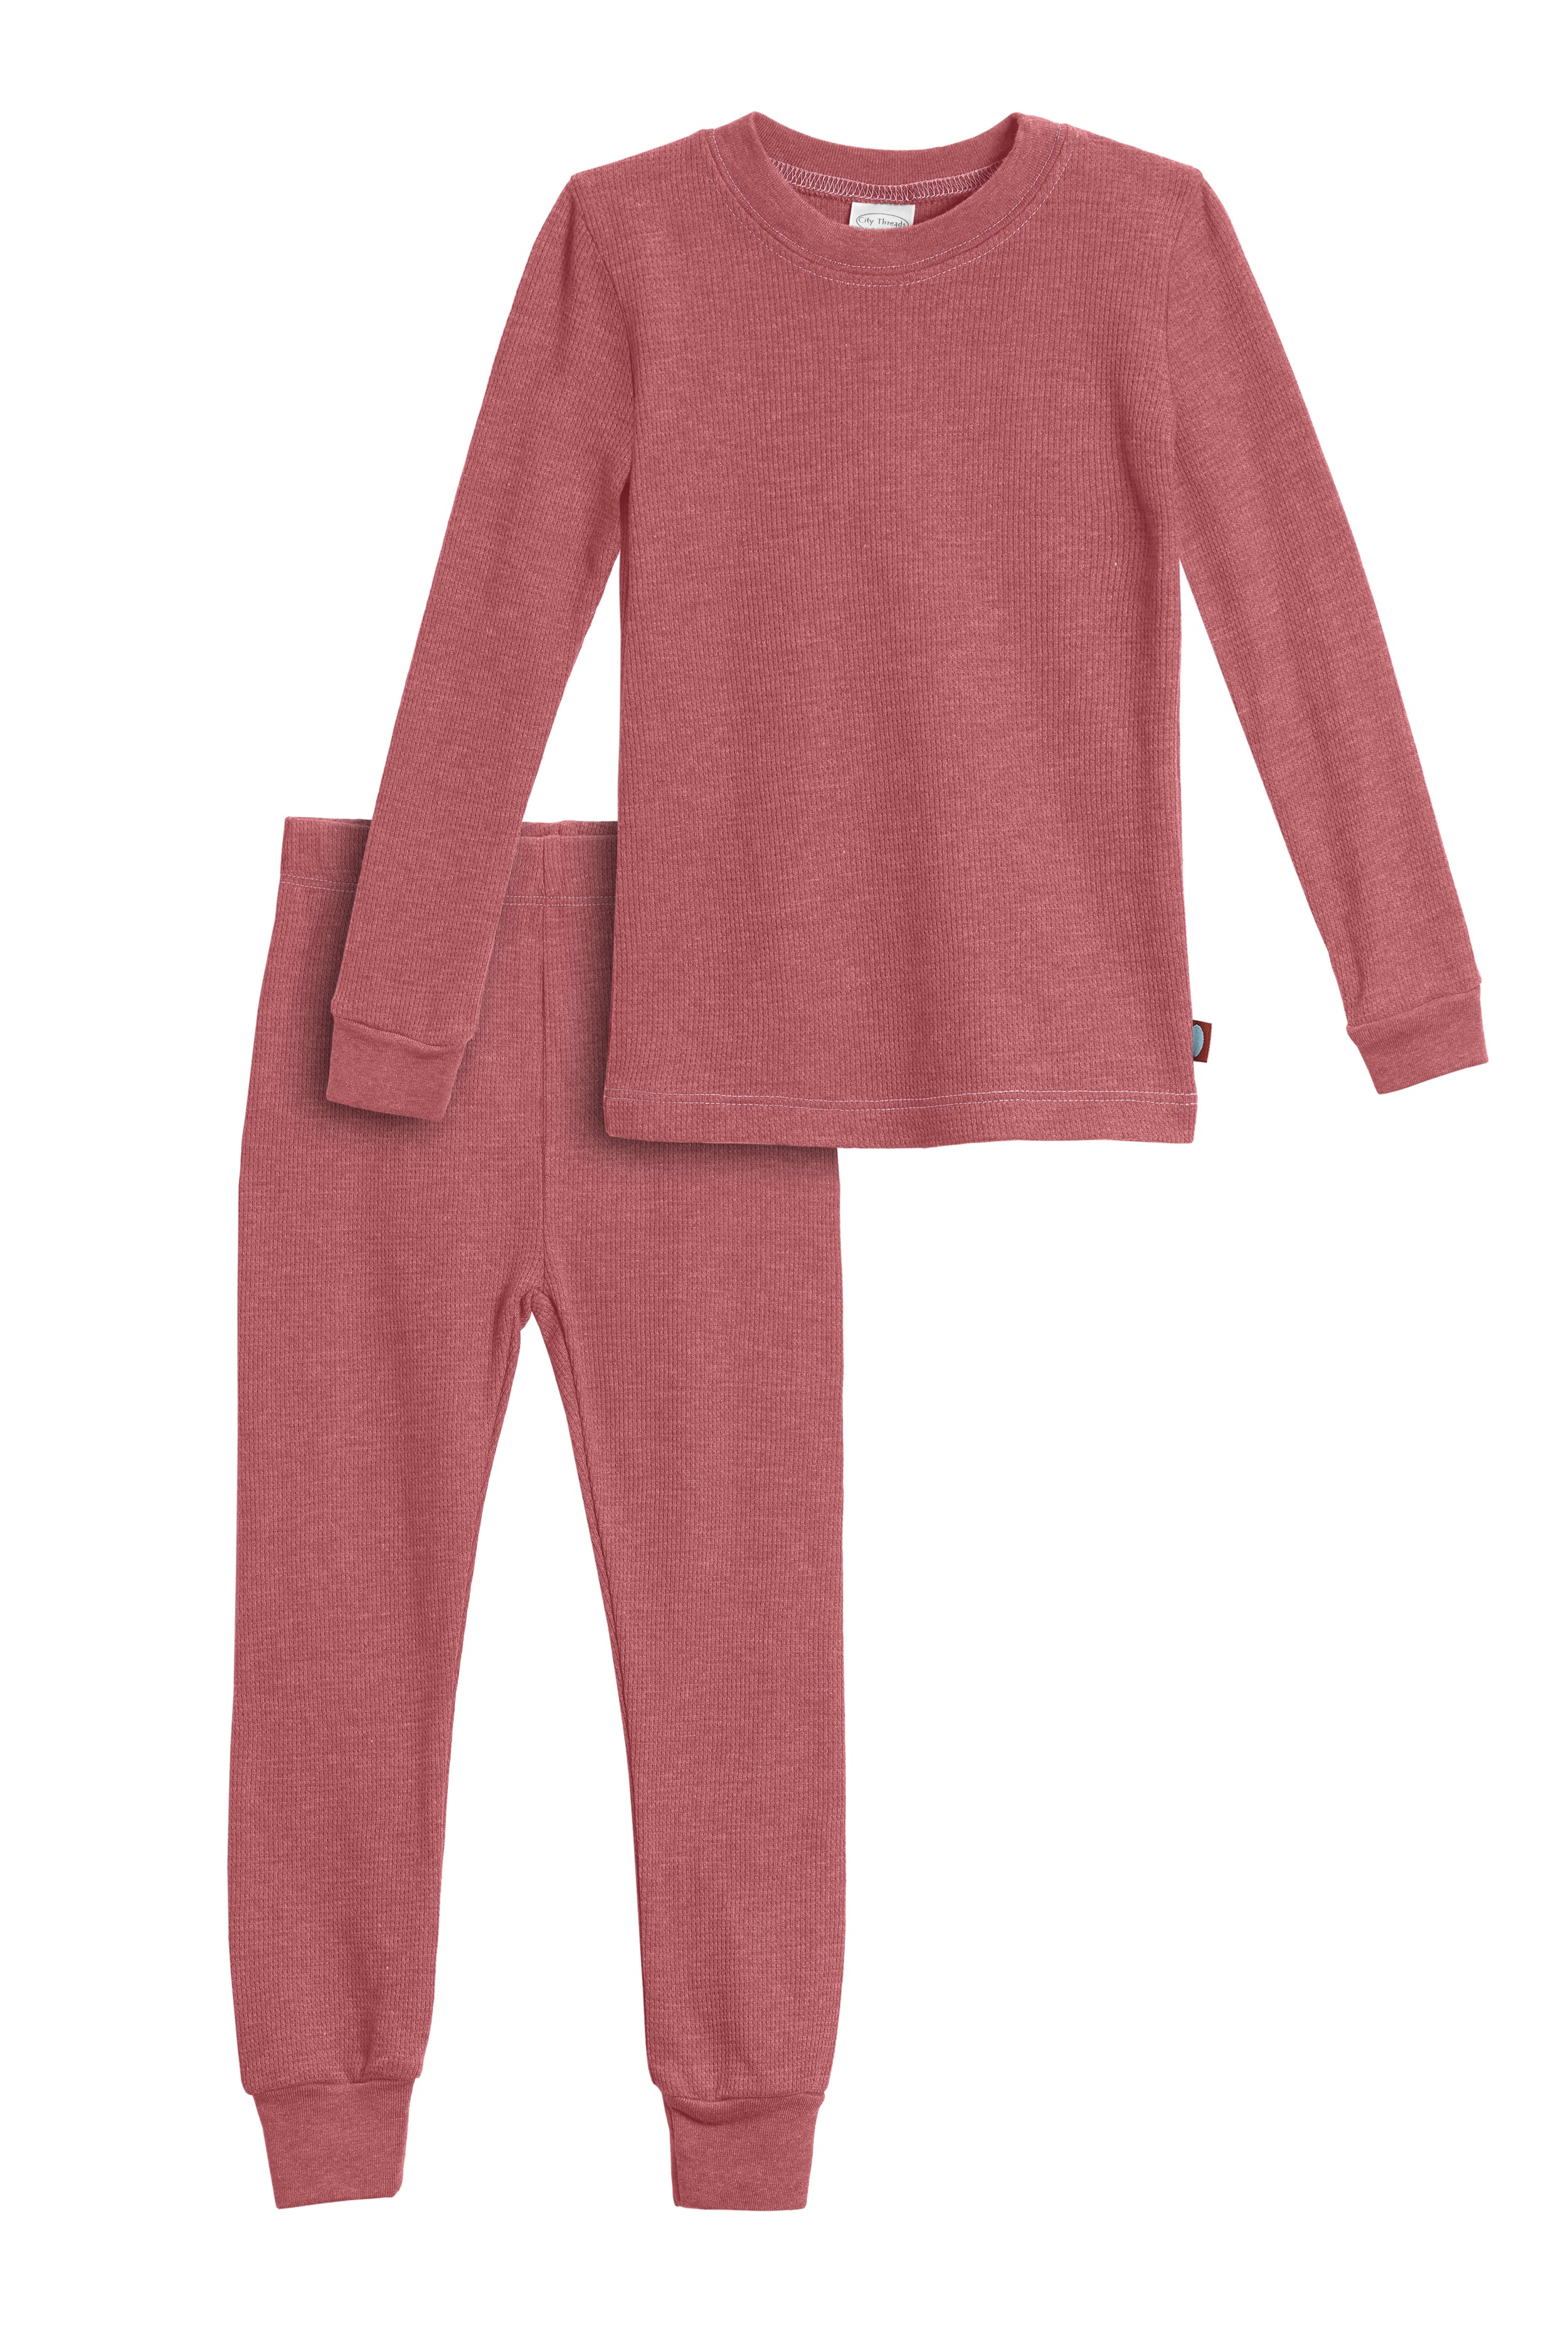 City Threads Girls USA-Made Soft & Cozy Thermal 2-Piece Long Johns,Red w/ Light Pink Stitch ,3-6 Months